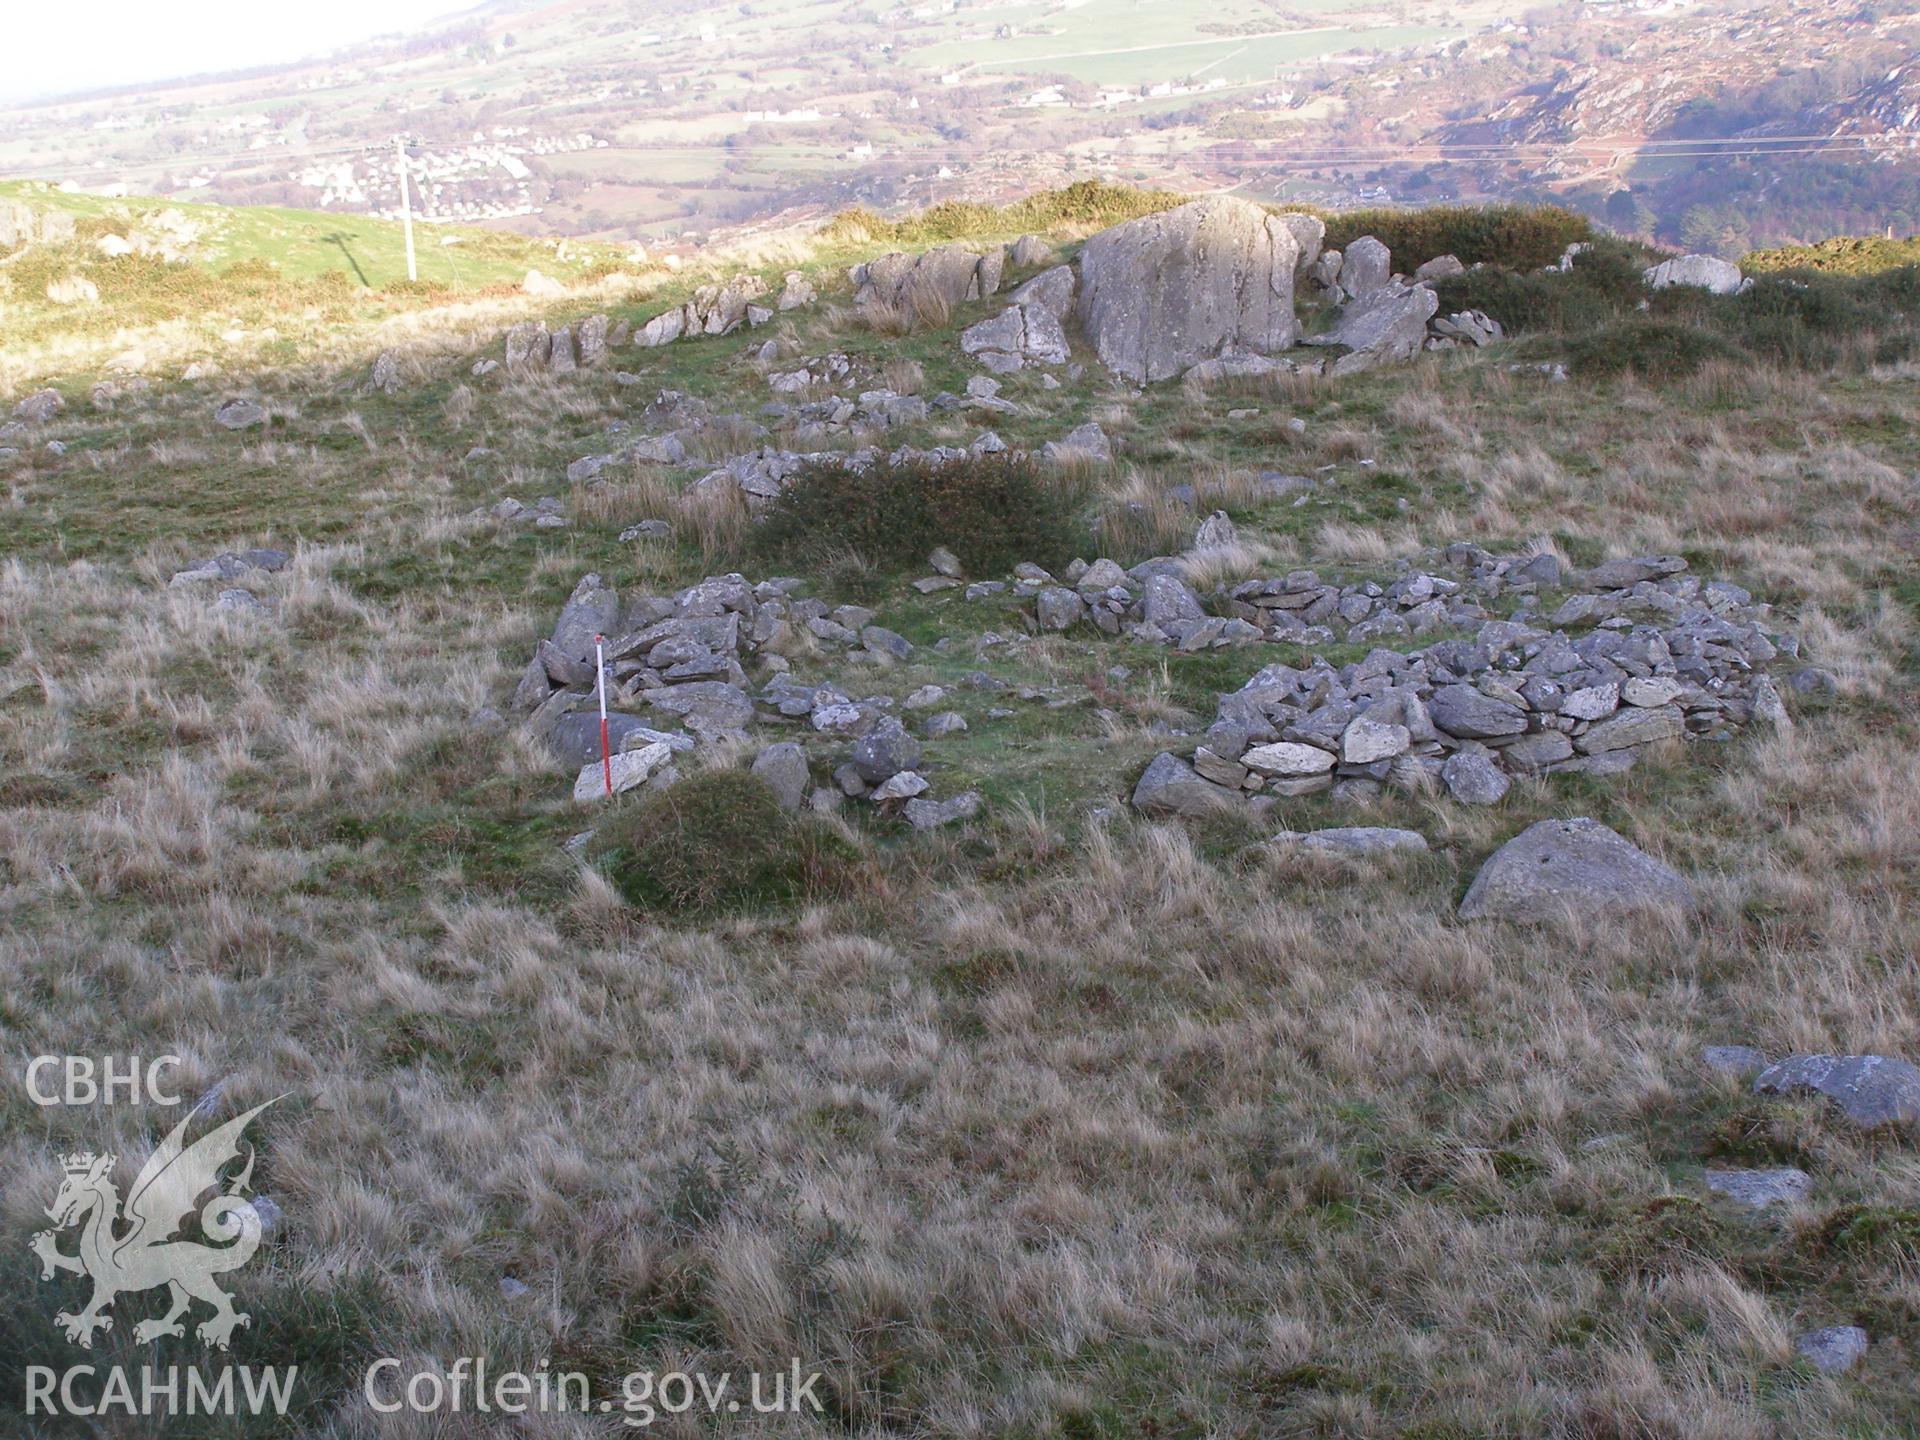 Digital colour photograph of Gallt y Celyn hut circle settlement taken on 13/12/2007 by P.J. Schofield during the Snowdon North West Upland Survey undertaken by Oxford Archaeology North.